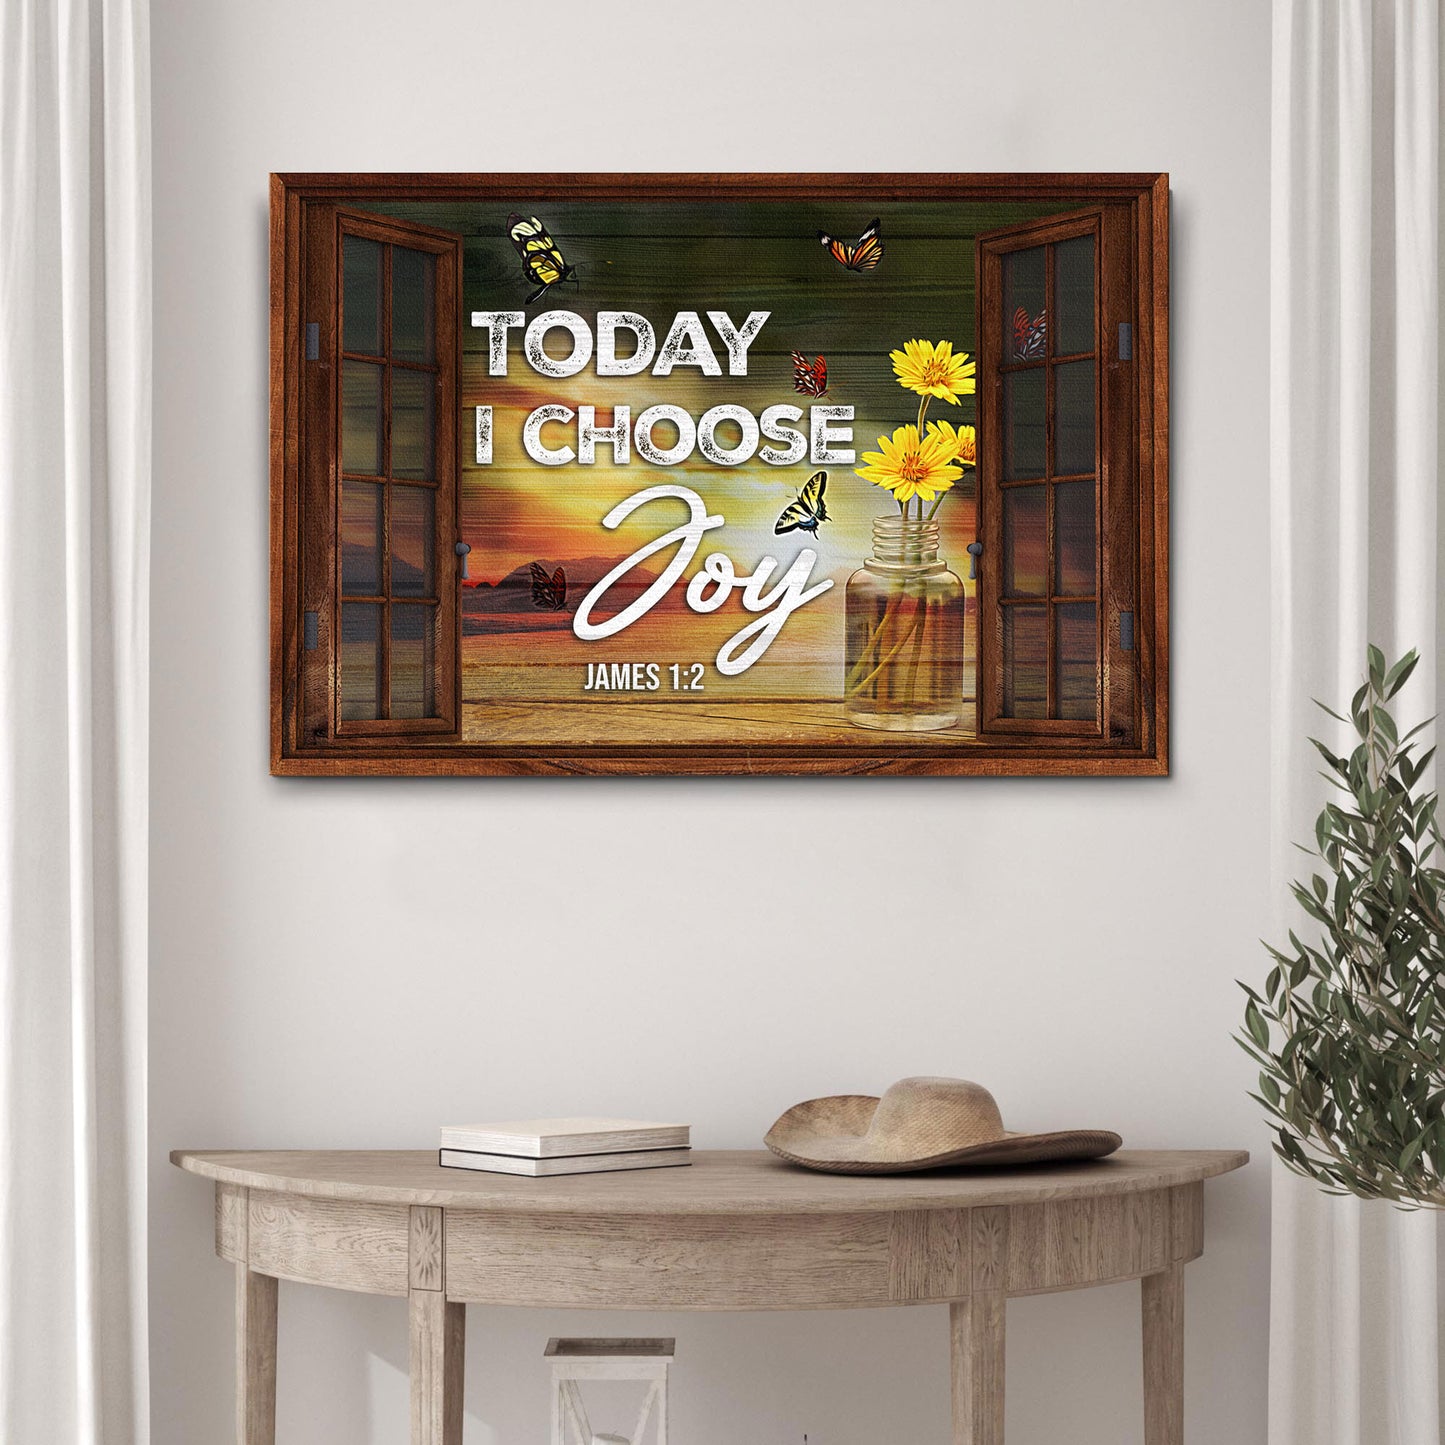 James 1:2 - Today I Choose Joy Sign III Style 1 - Image by Tailored Canvases